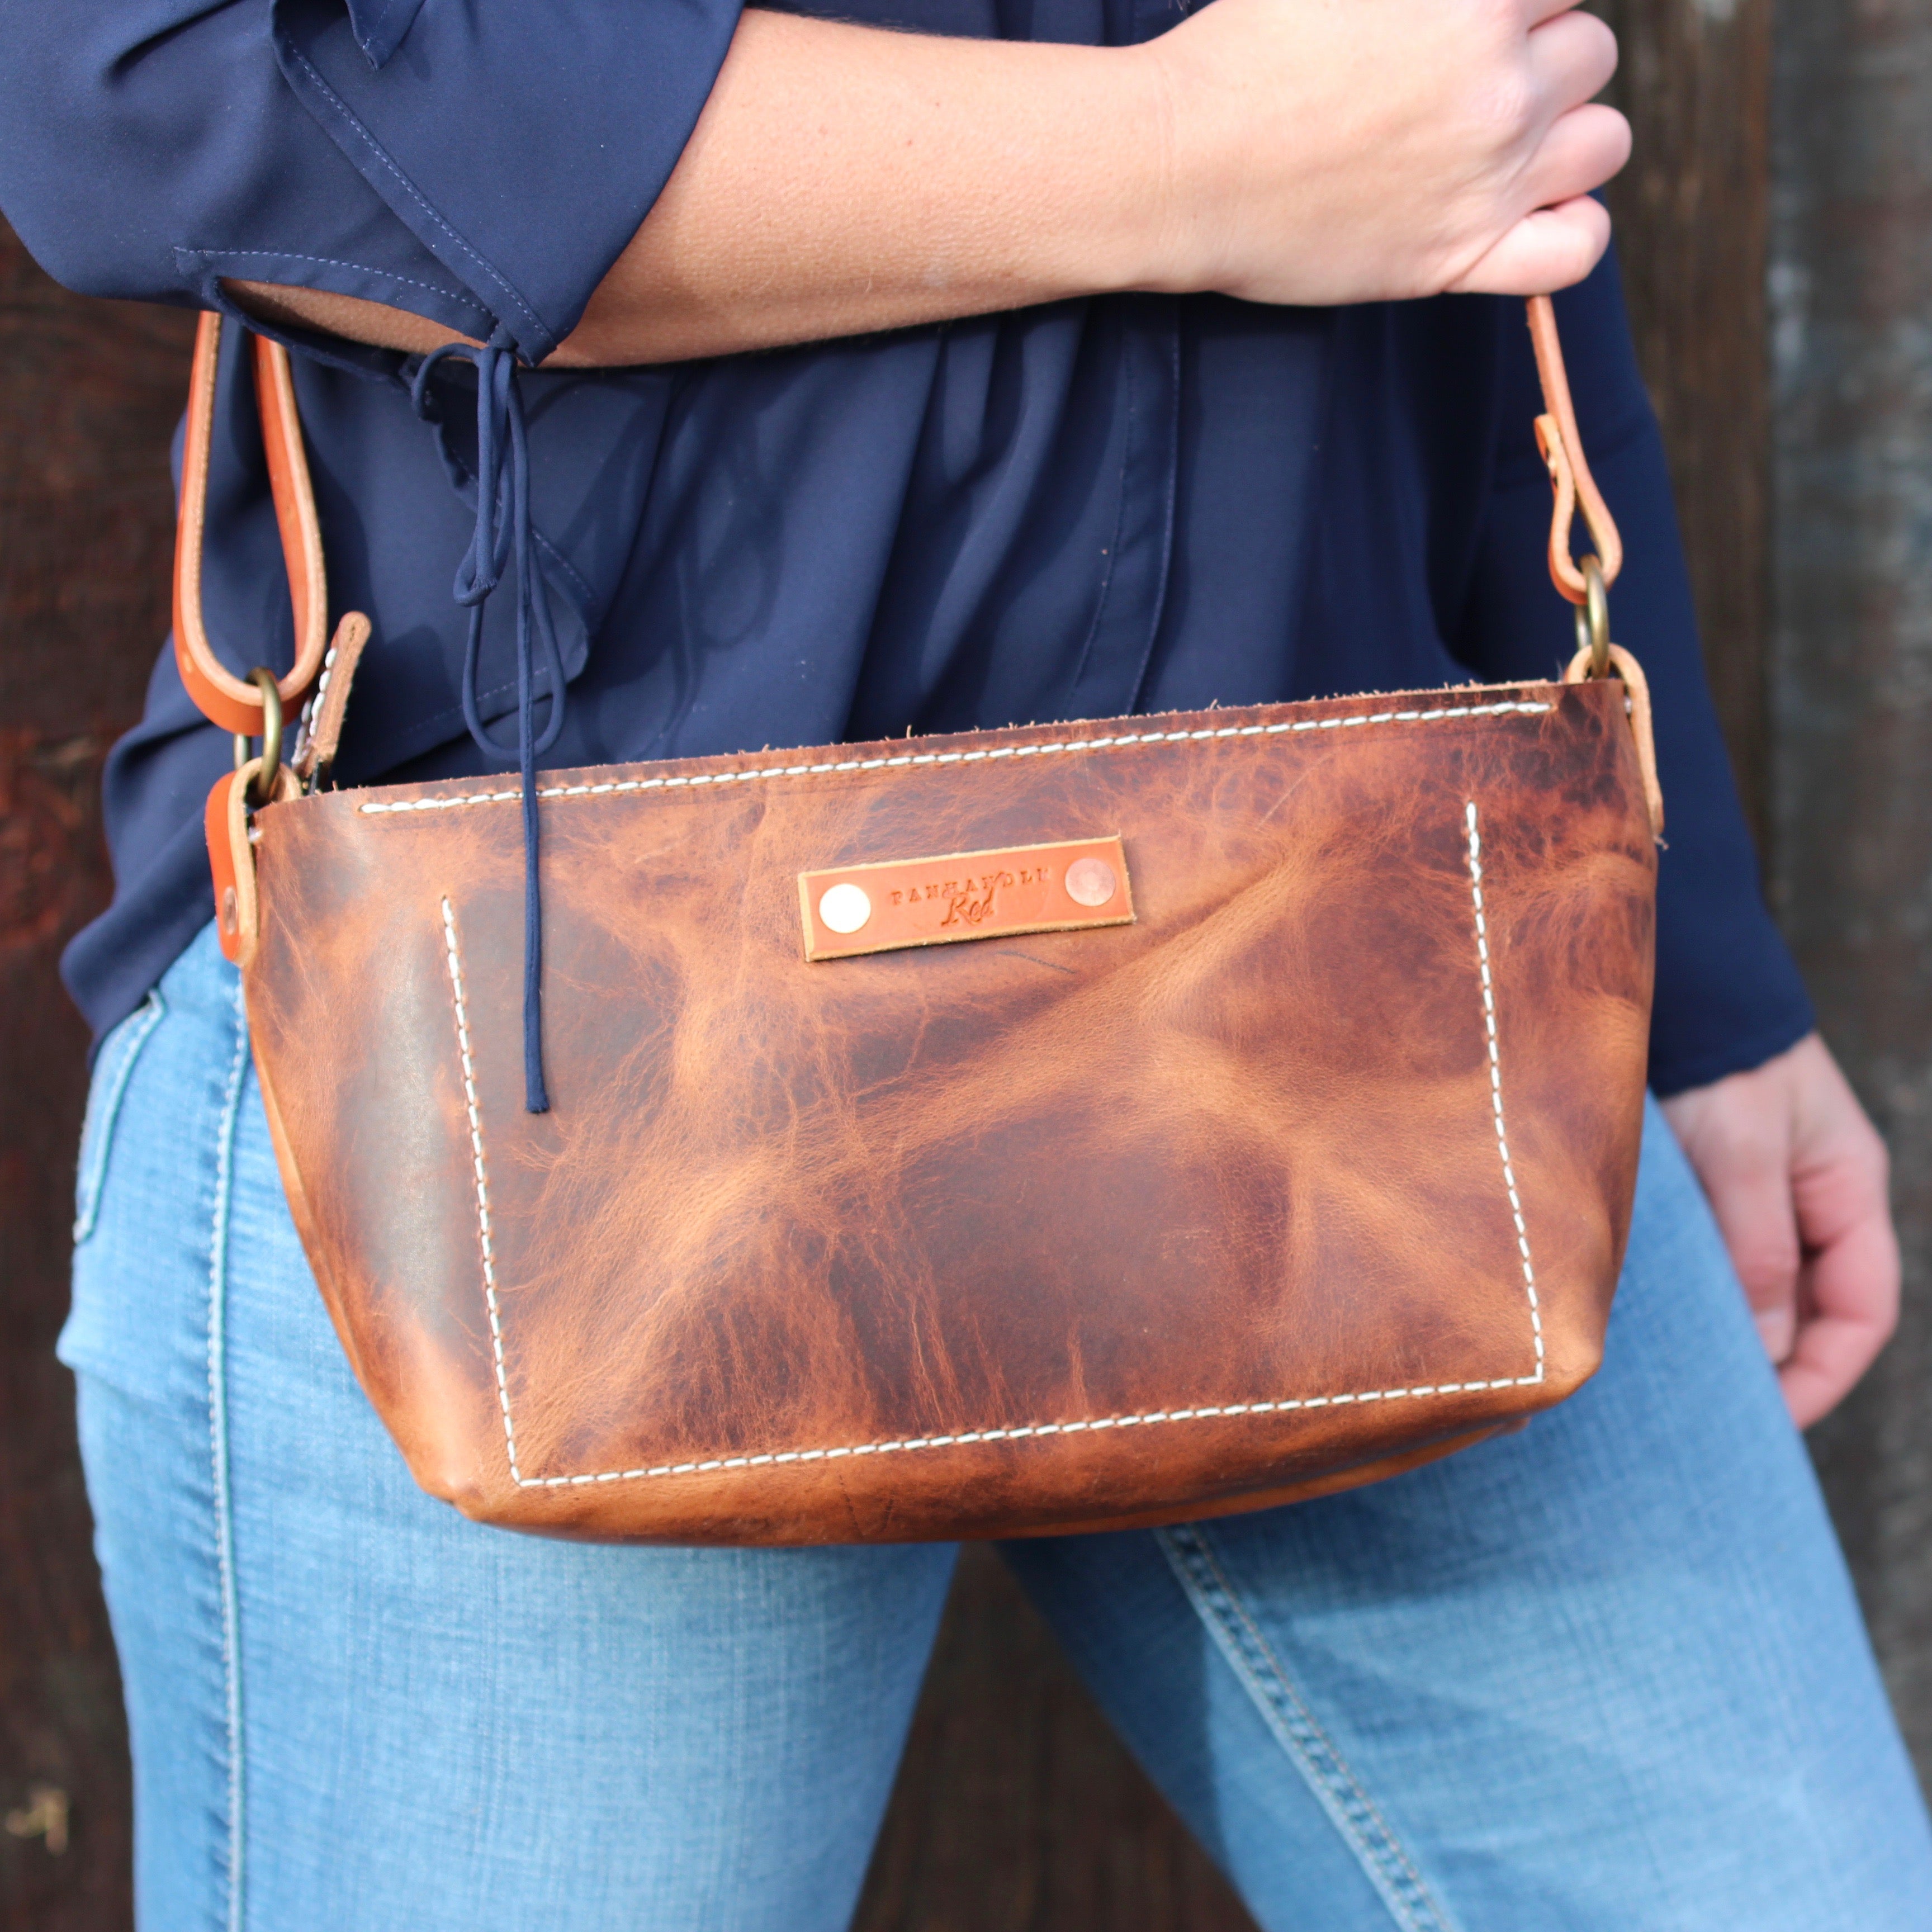 Brown Leather Crossbody Purse, Leather crossbody purse, crossbody purse, Panhandle Red Company, Leather Goods, Handbags, Leather Totes, Leather Duffles, Leather Bags,  Purses, Everyday Carry Needs, and more. Full-grain leather items, custom gifts, all Handcrafted in Idaho, USA.